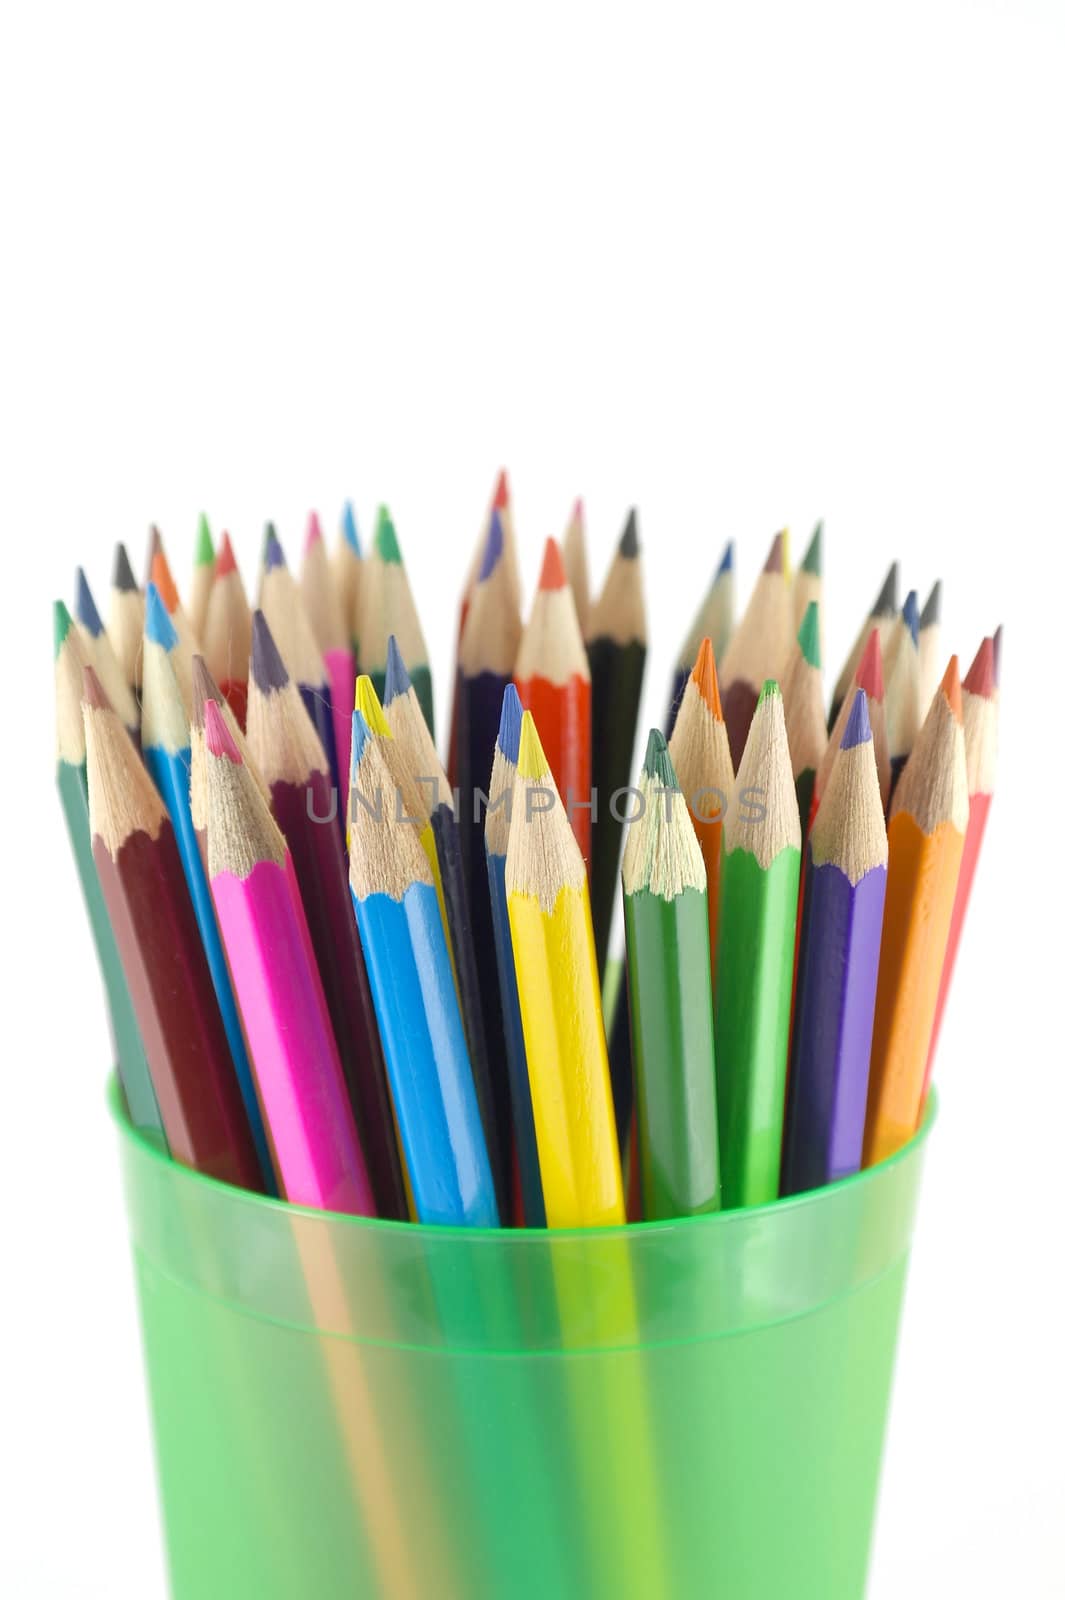 Color pencils in the green prop over white. Shallow DOF.